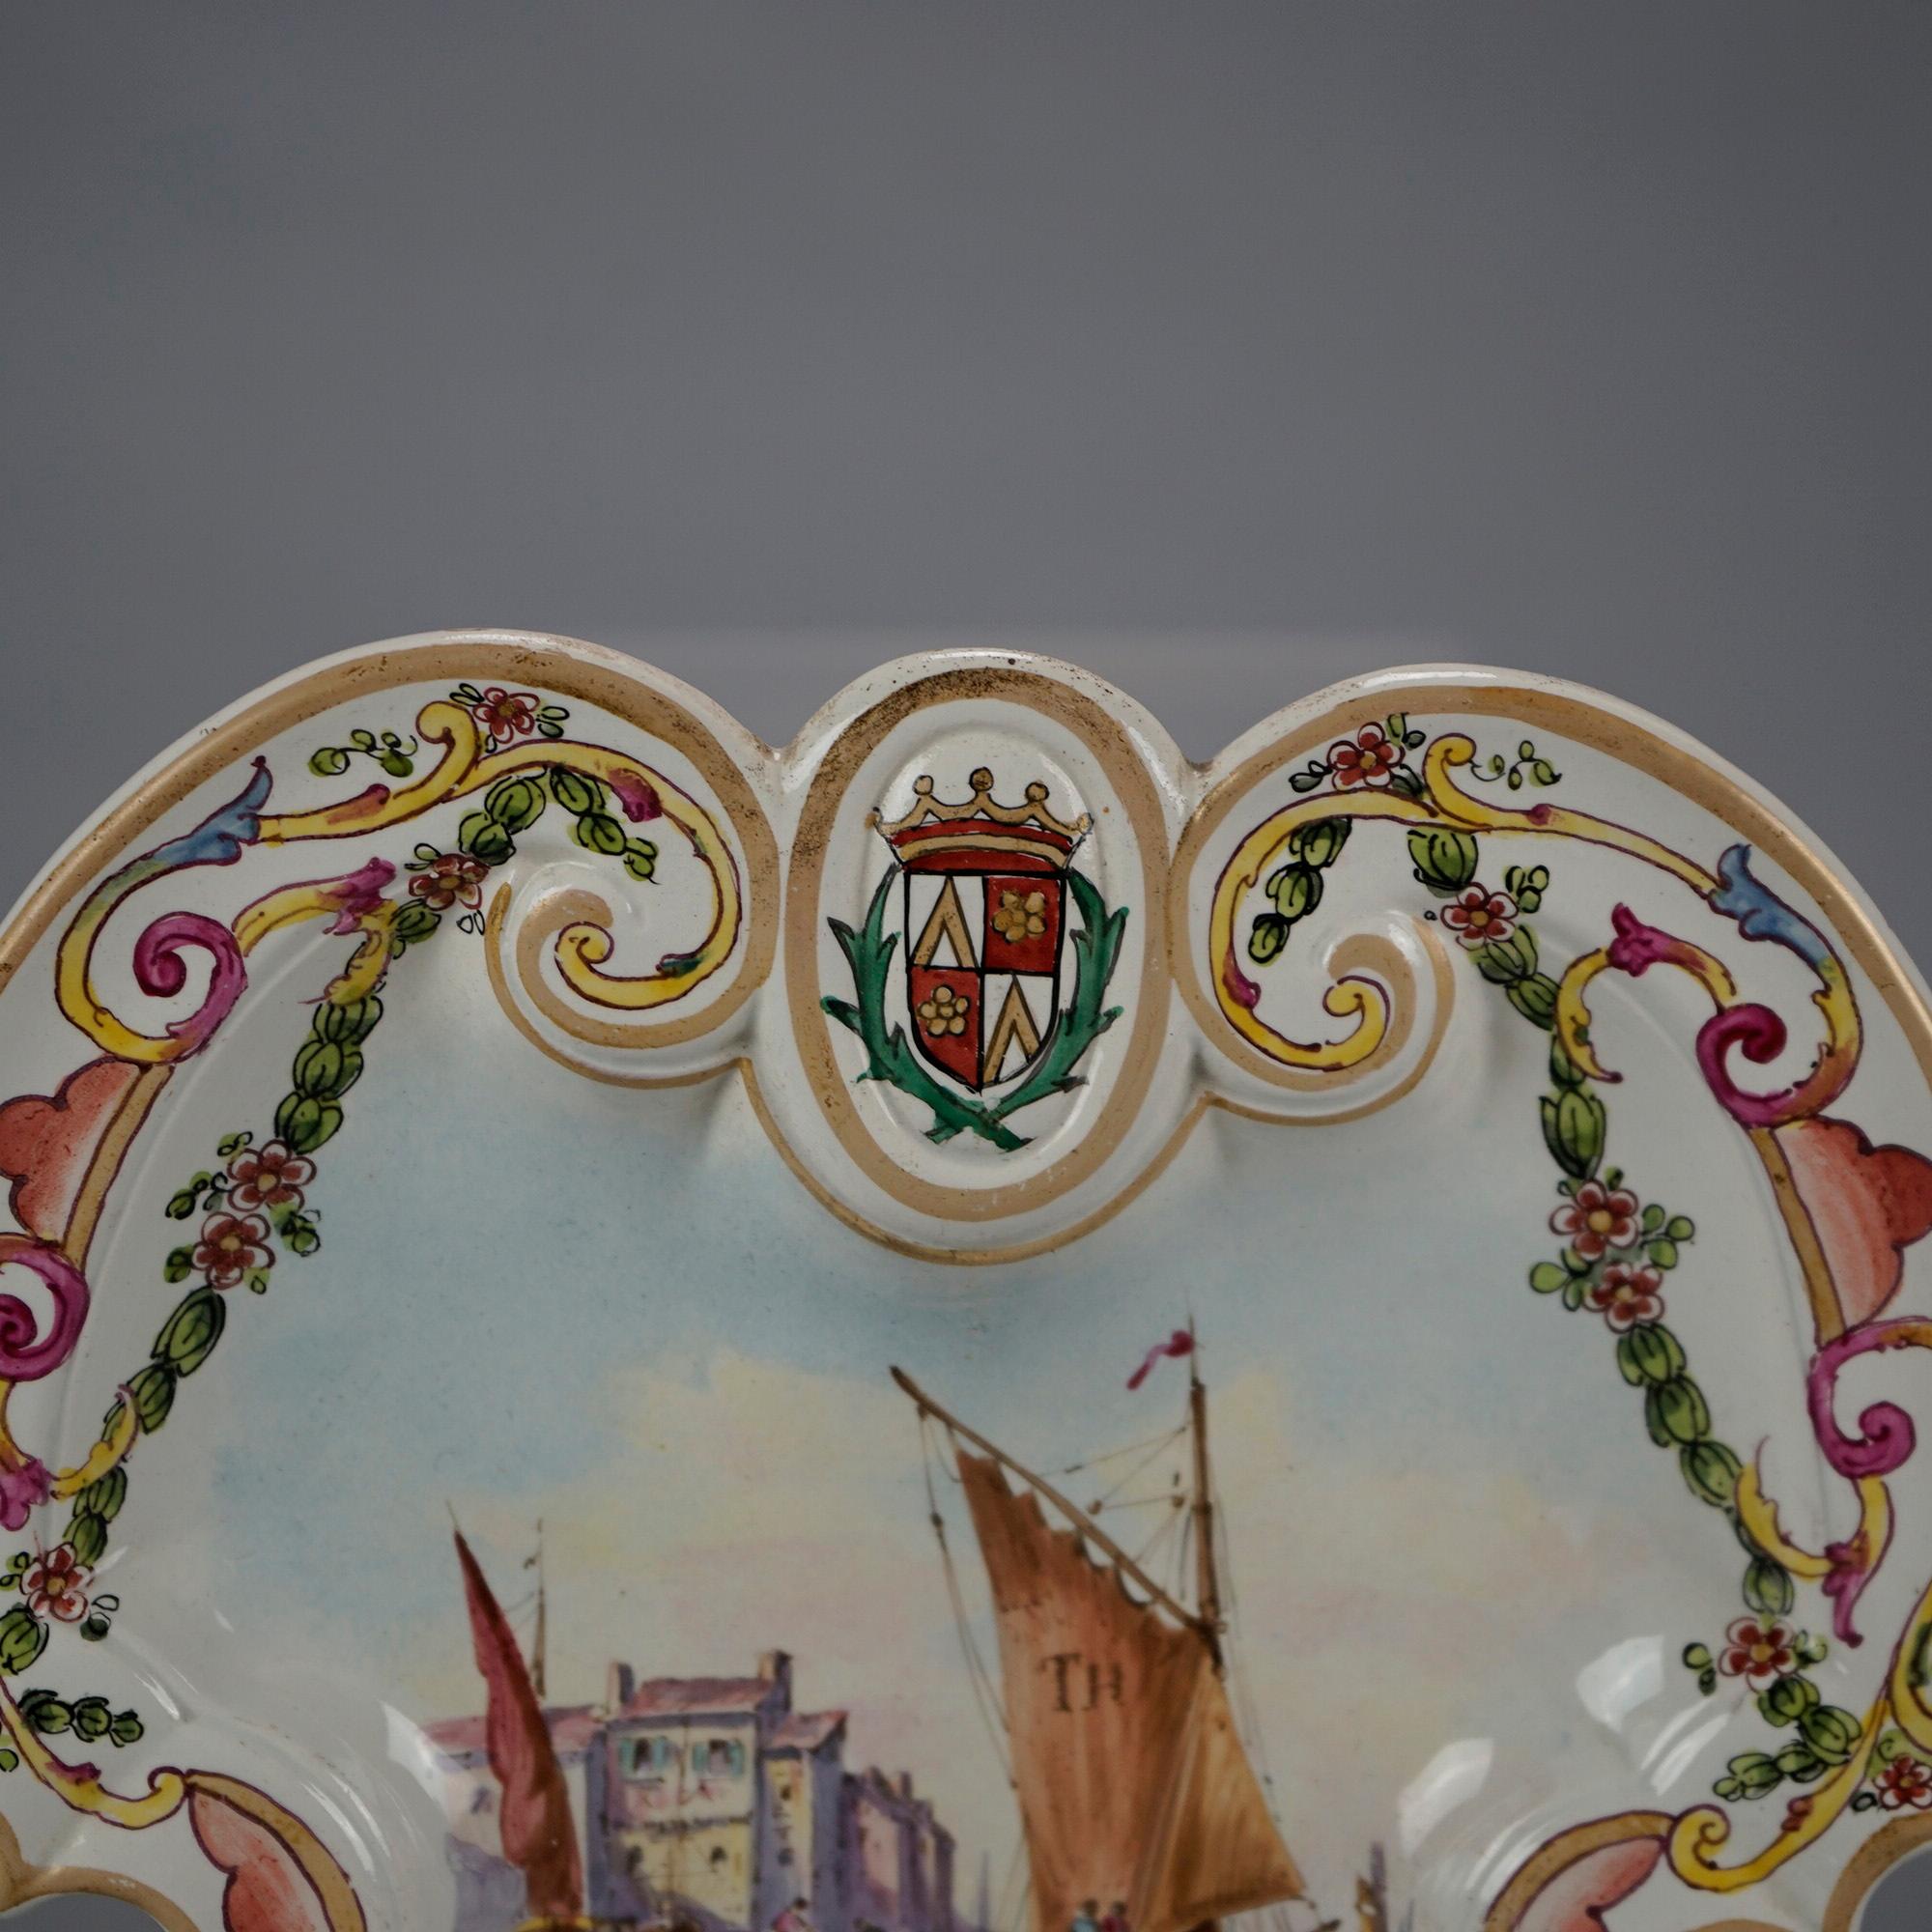 Hand-Painted Antique Soft Paste Faience French Maritime Polychrome Plates, Lille 1767